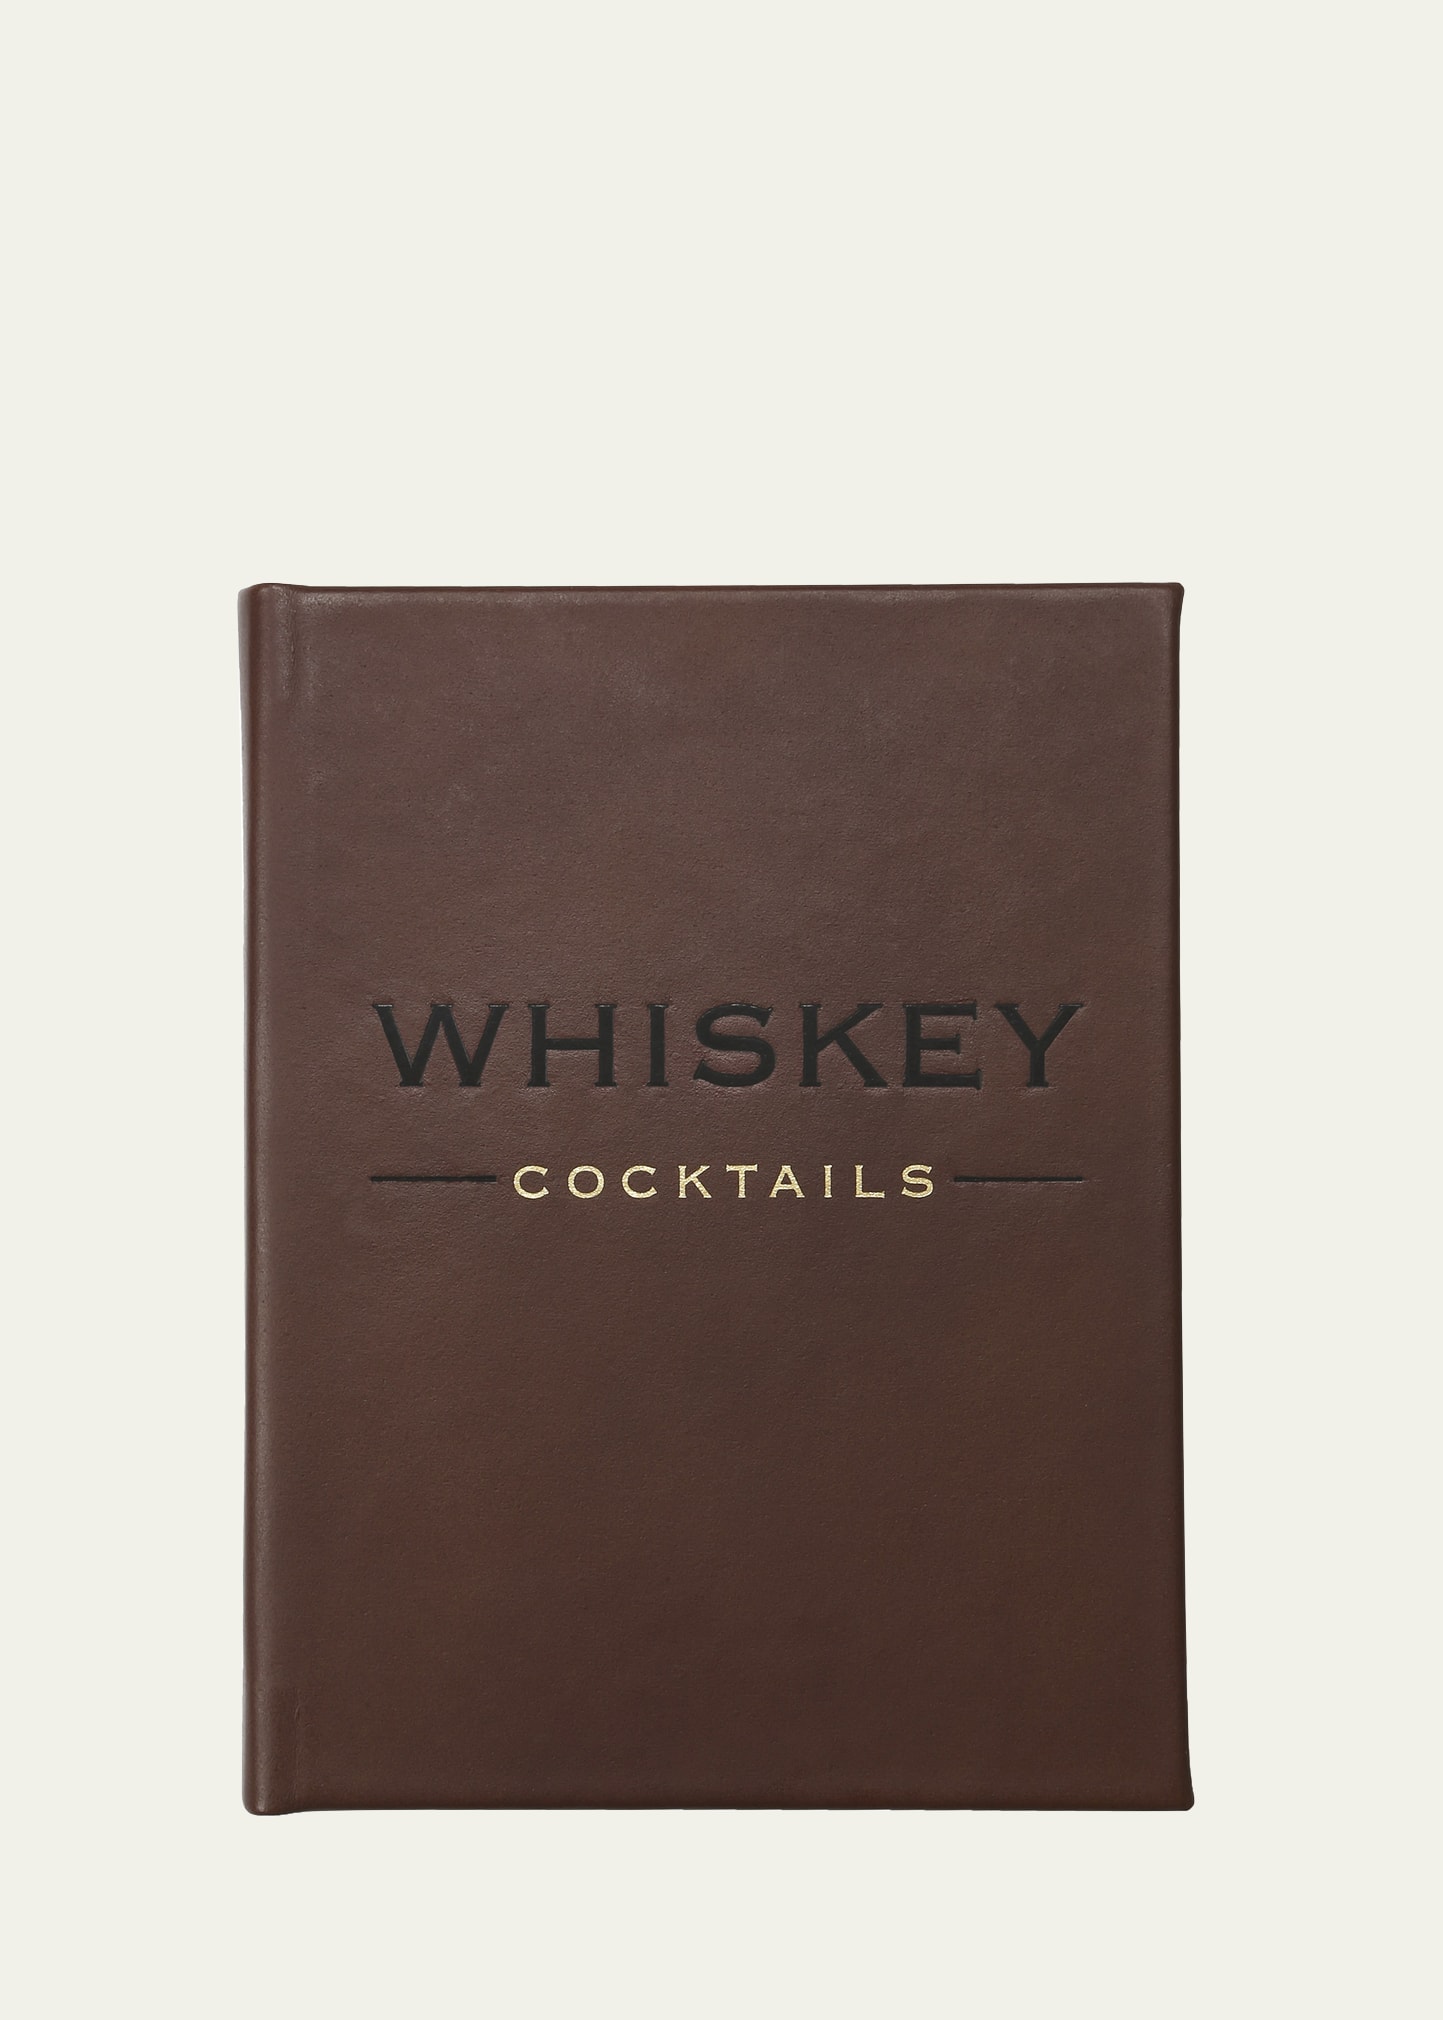 Whiskey Cocktails Book, Personalized